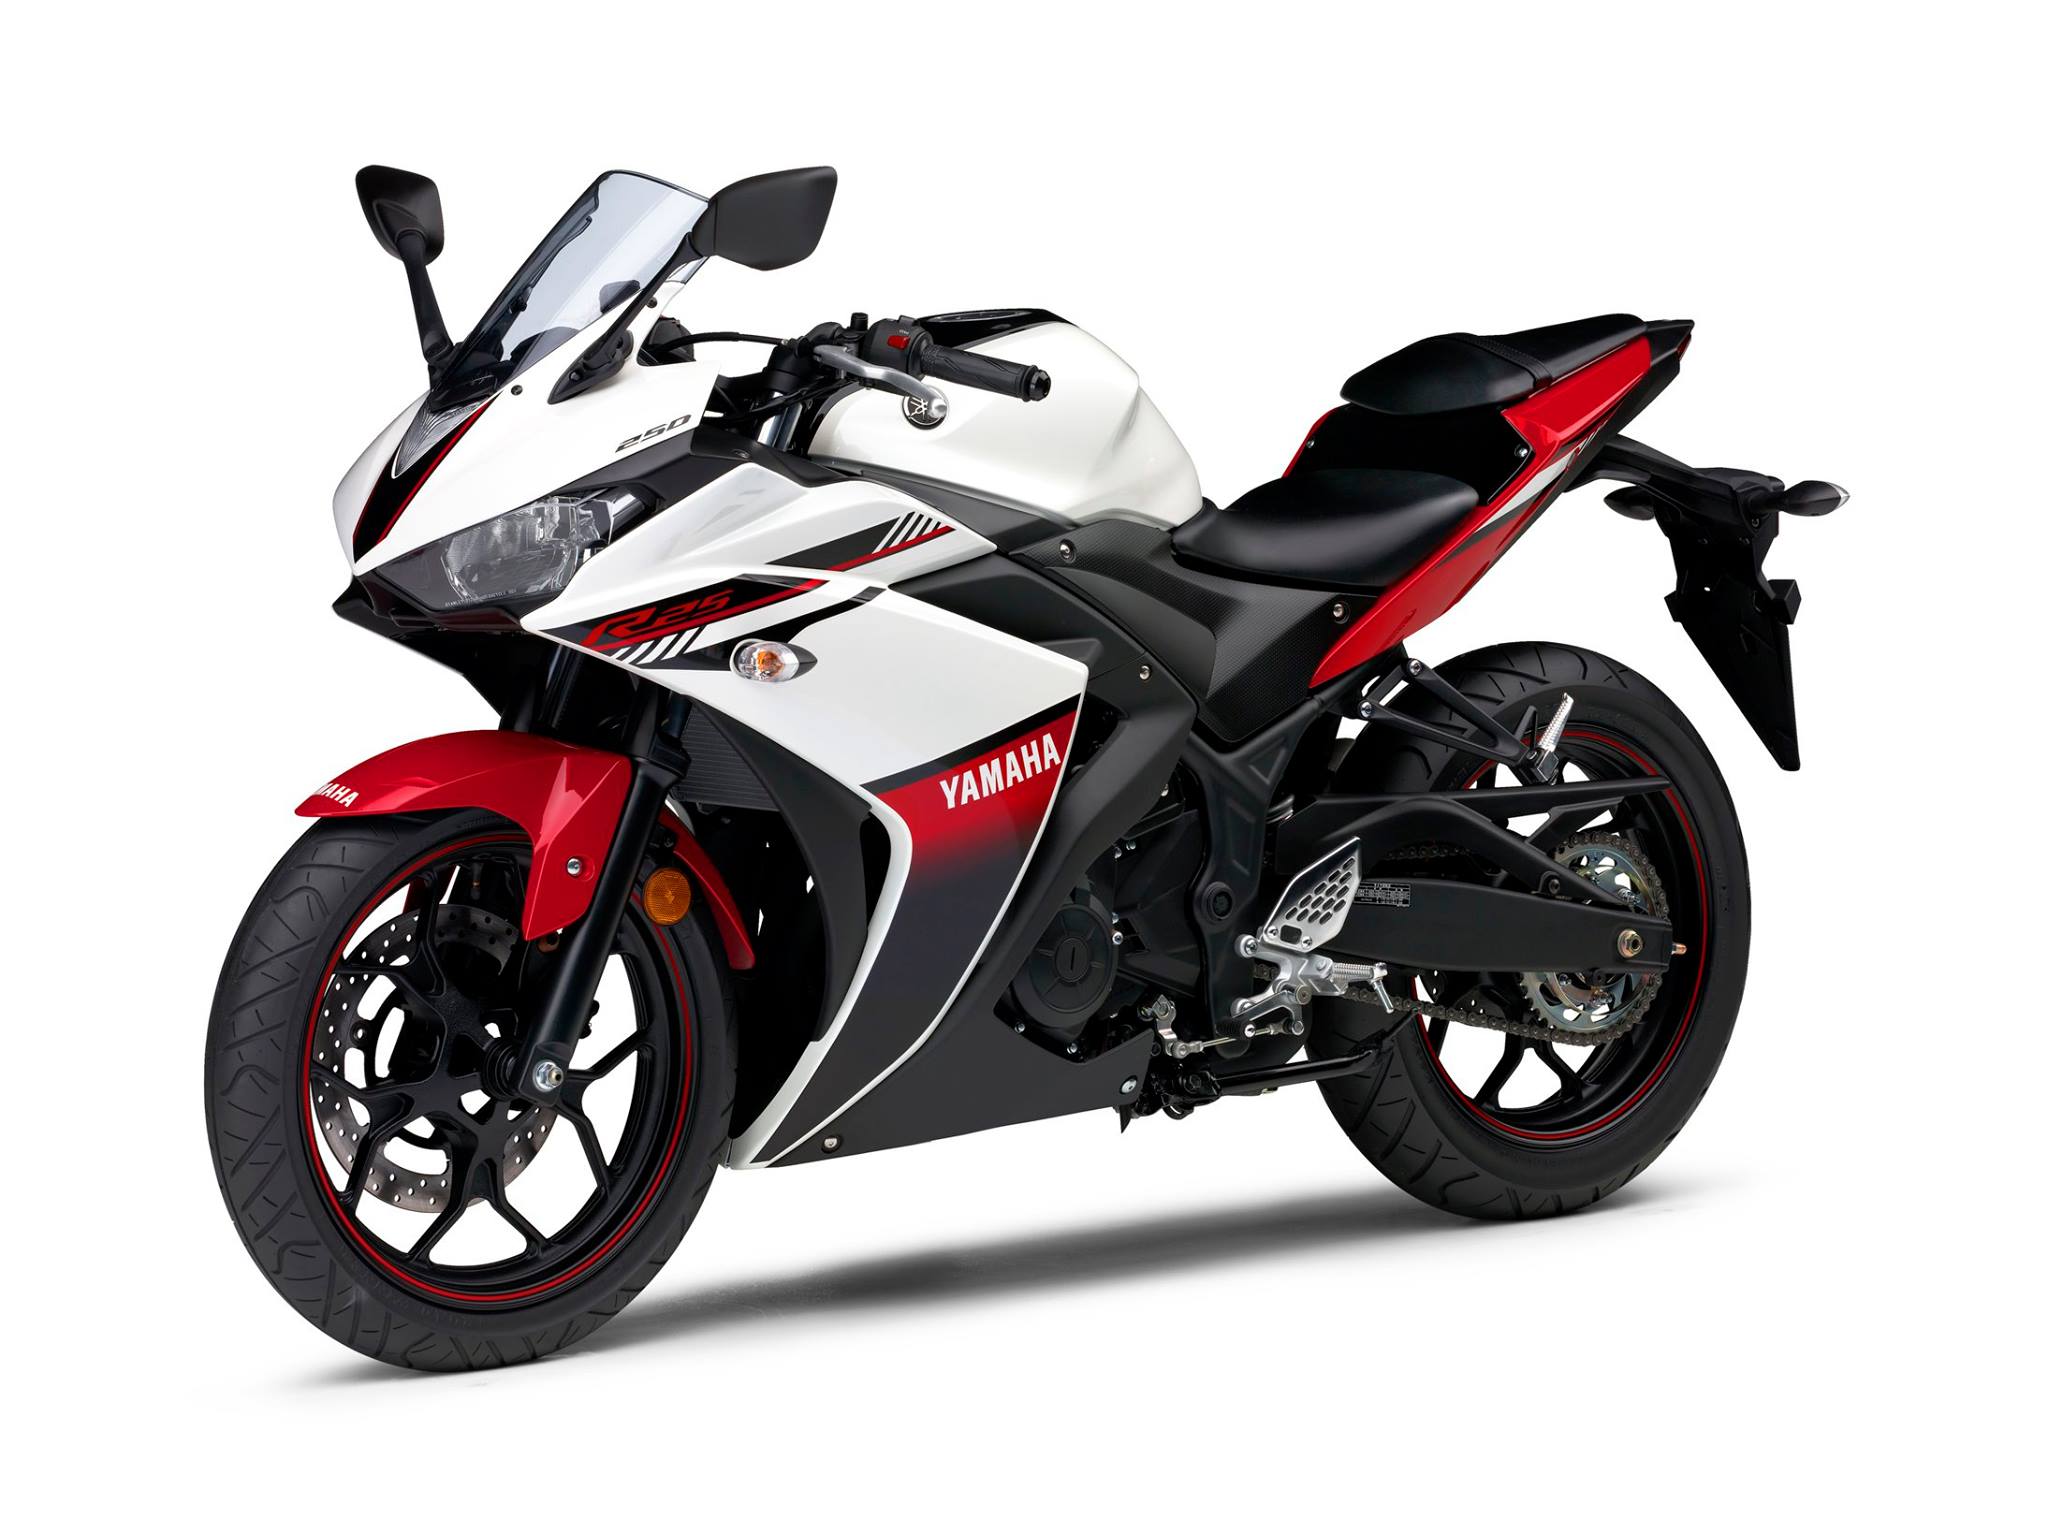 Yamaha YZF-R25 250cc Bike 2018 Price in Pakistan Specs Review Features Pics